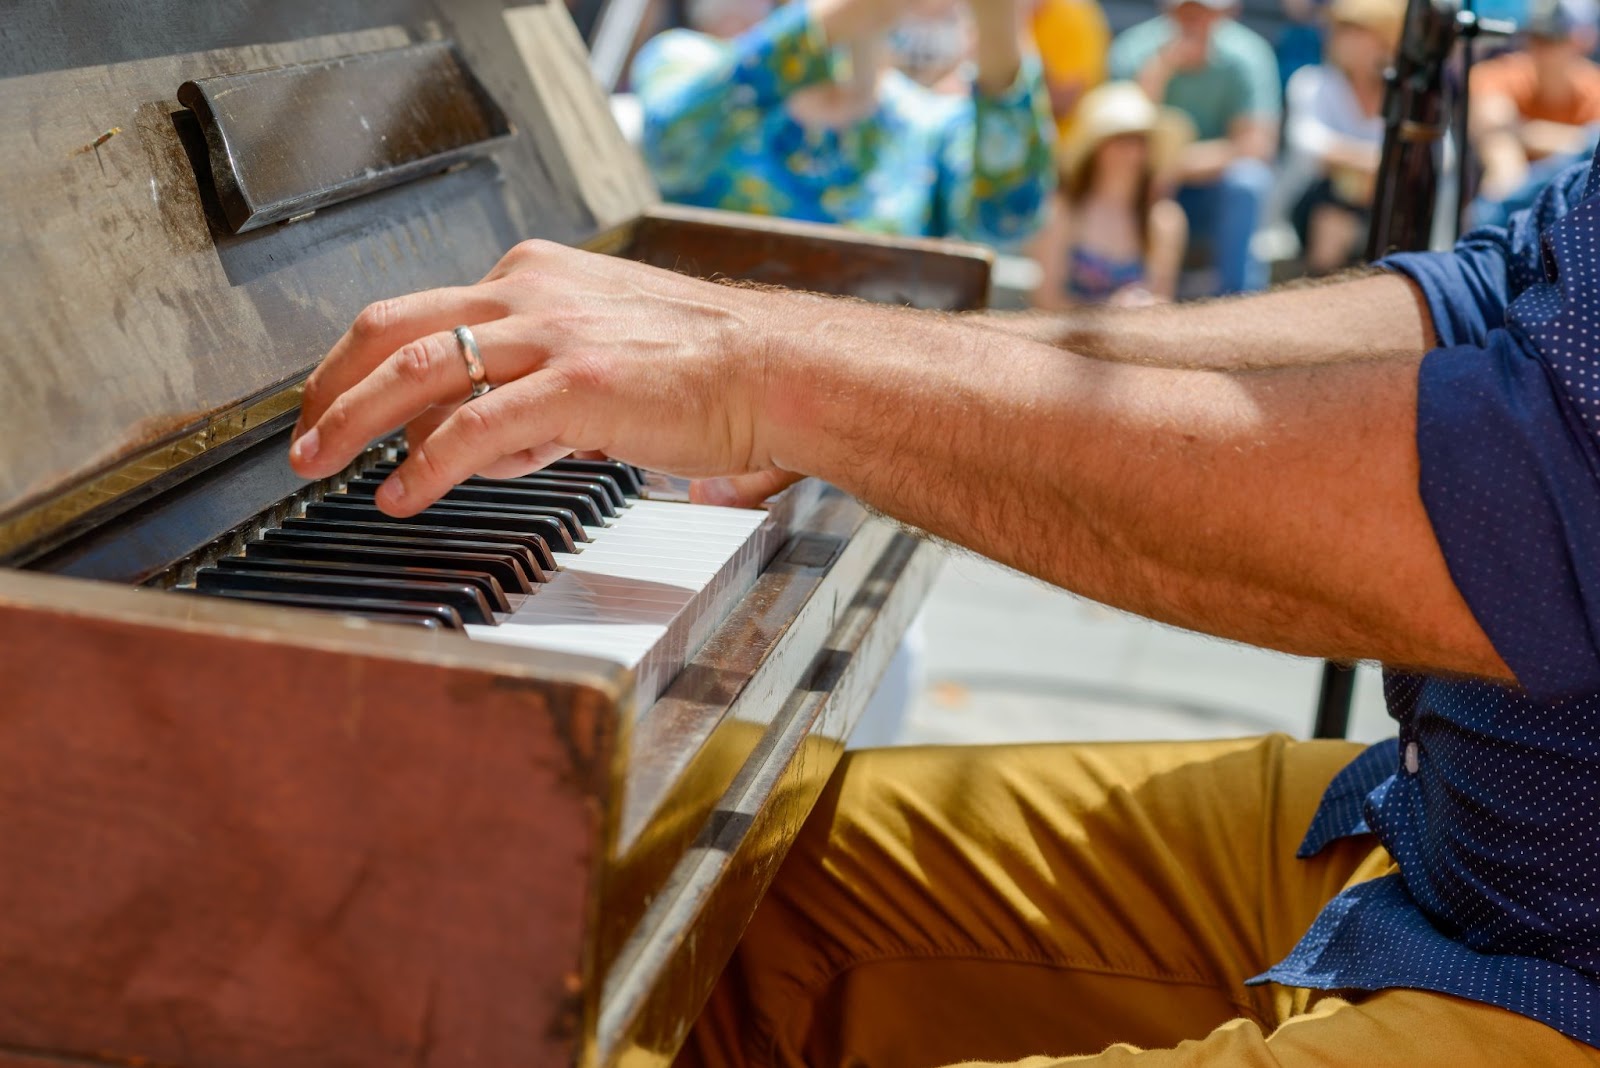 Piano players hands at Jazzfest, one of the best festivals in the U.S.